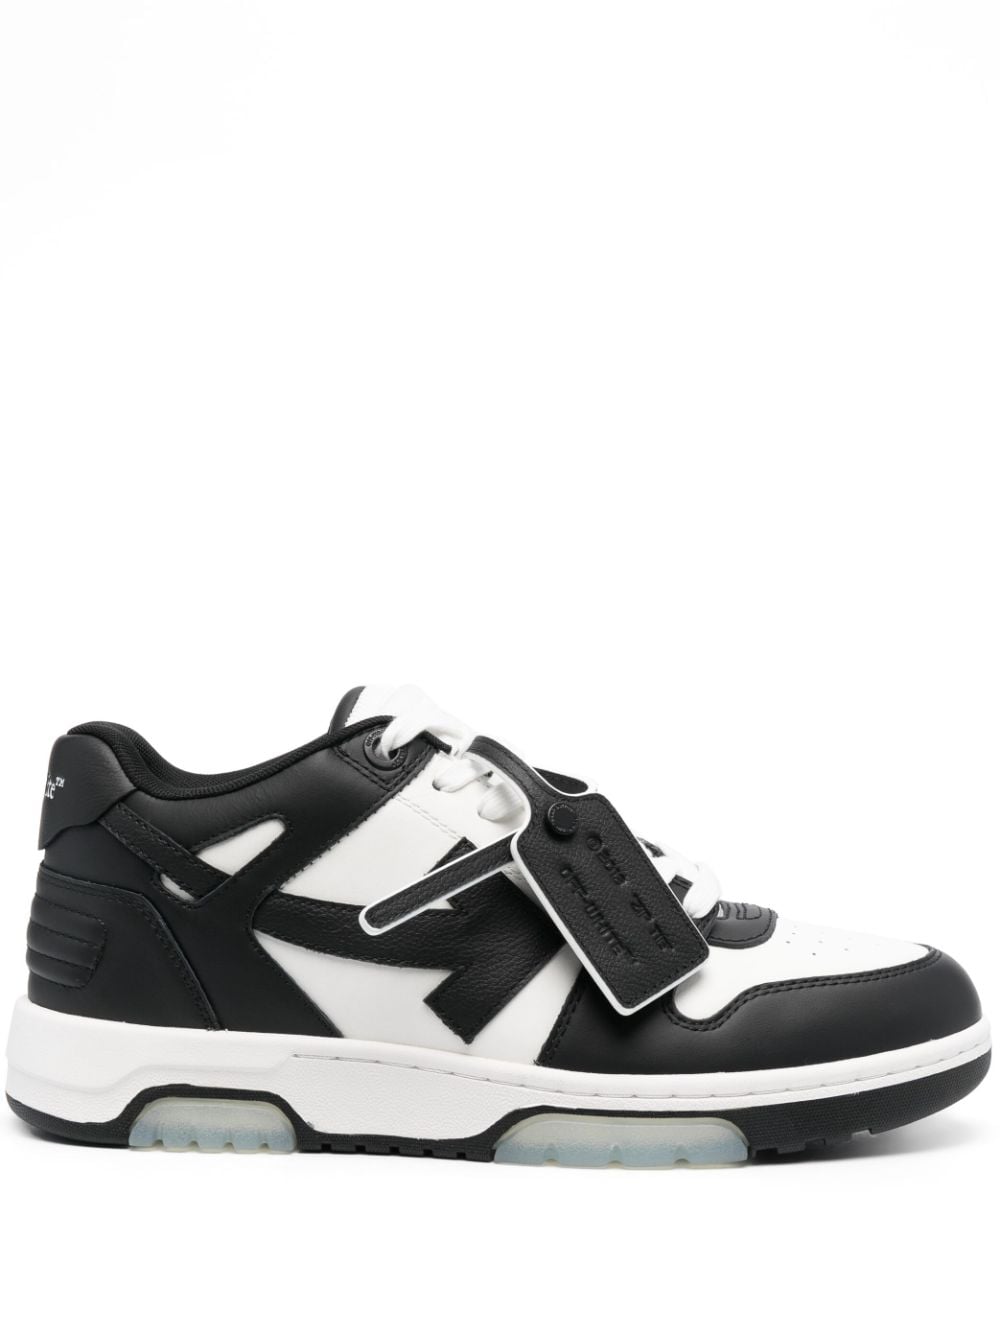 OFF-WHITE Black and White Leather Sneakers with Grey Side Arrow for Men